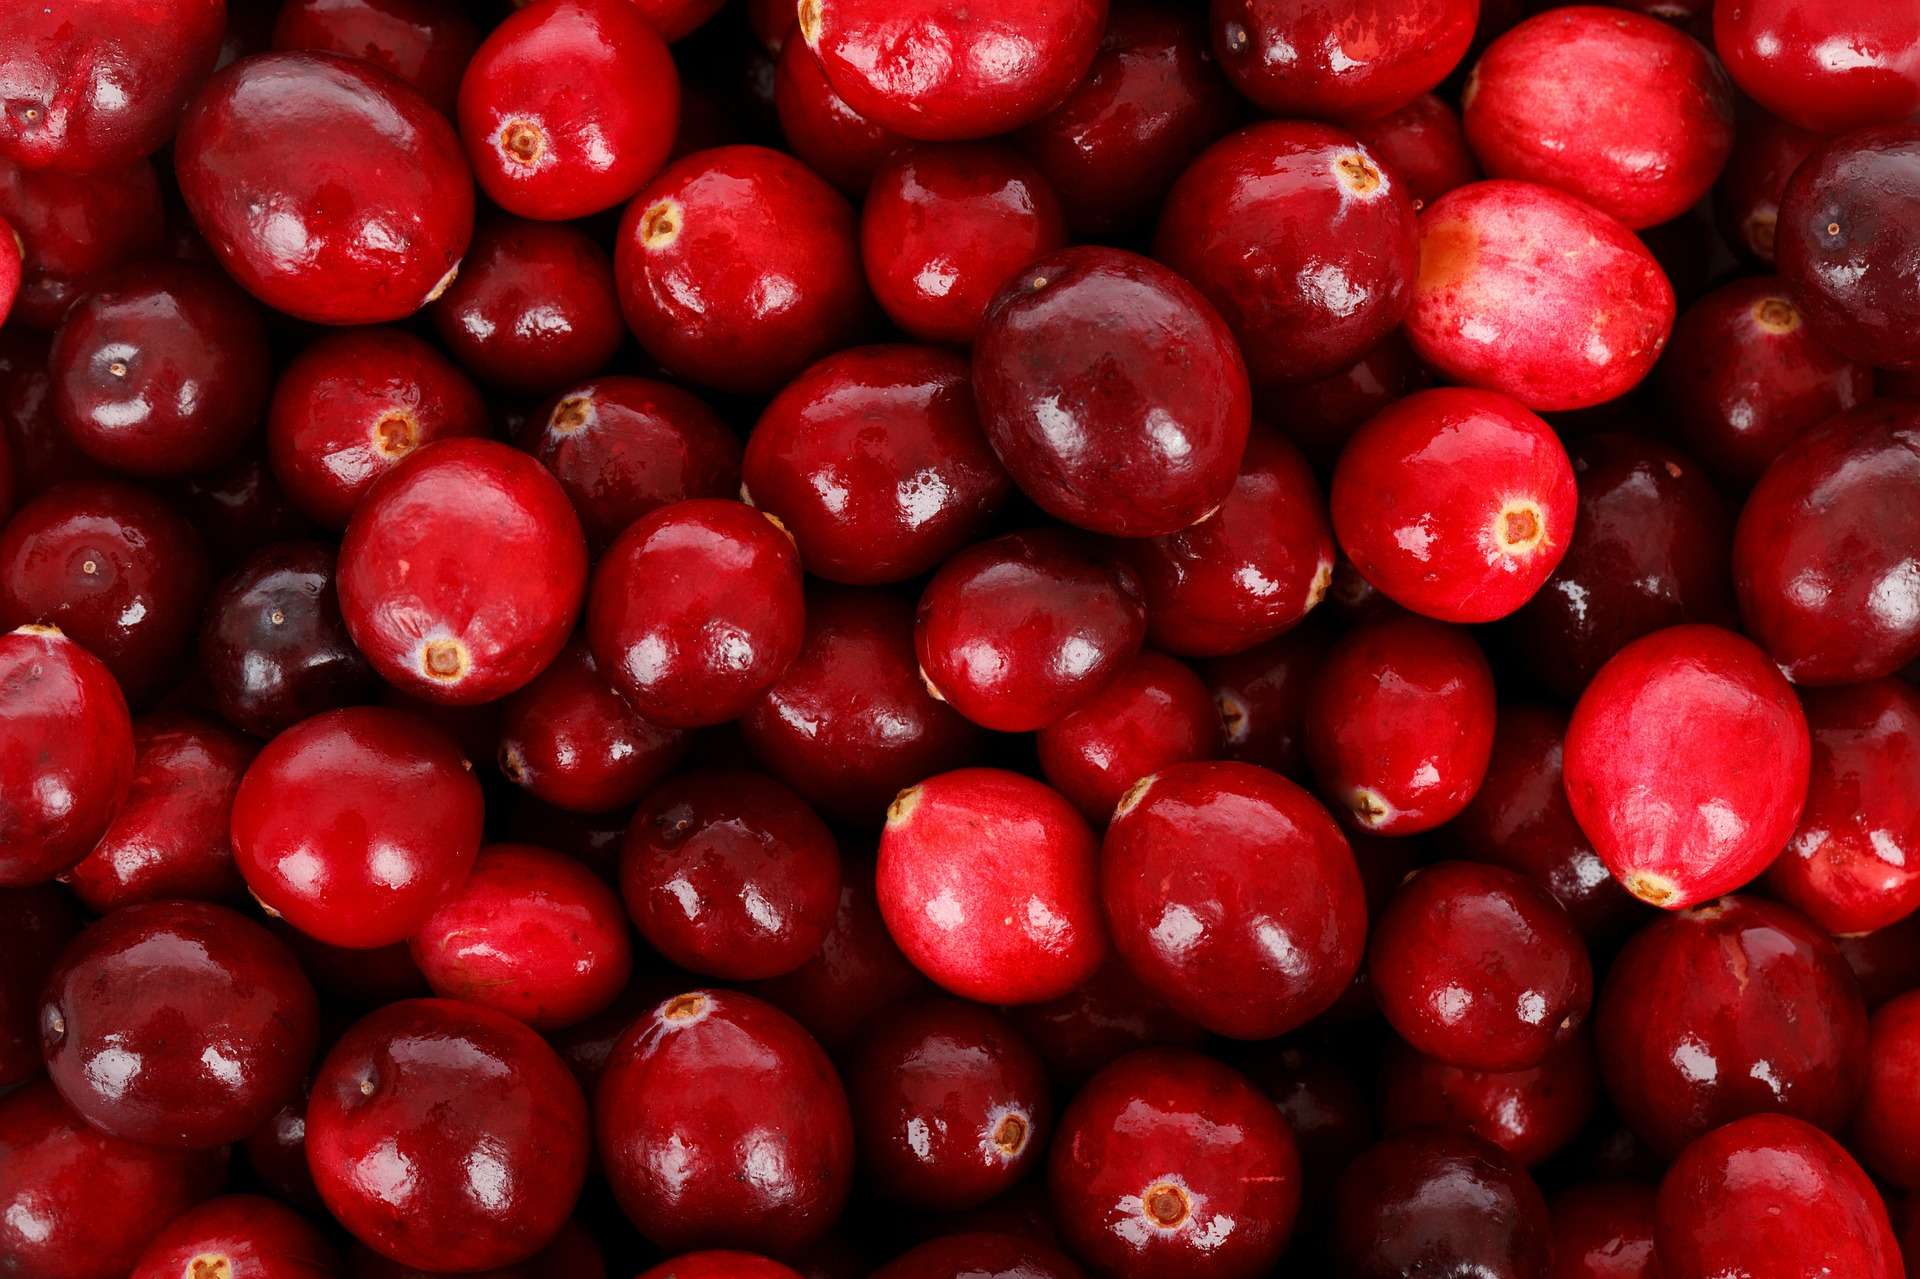 Cranberry Juice for Urinary Tract Infections: What does the Evidence Say?